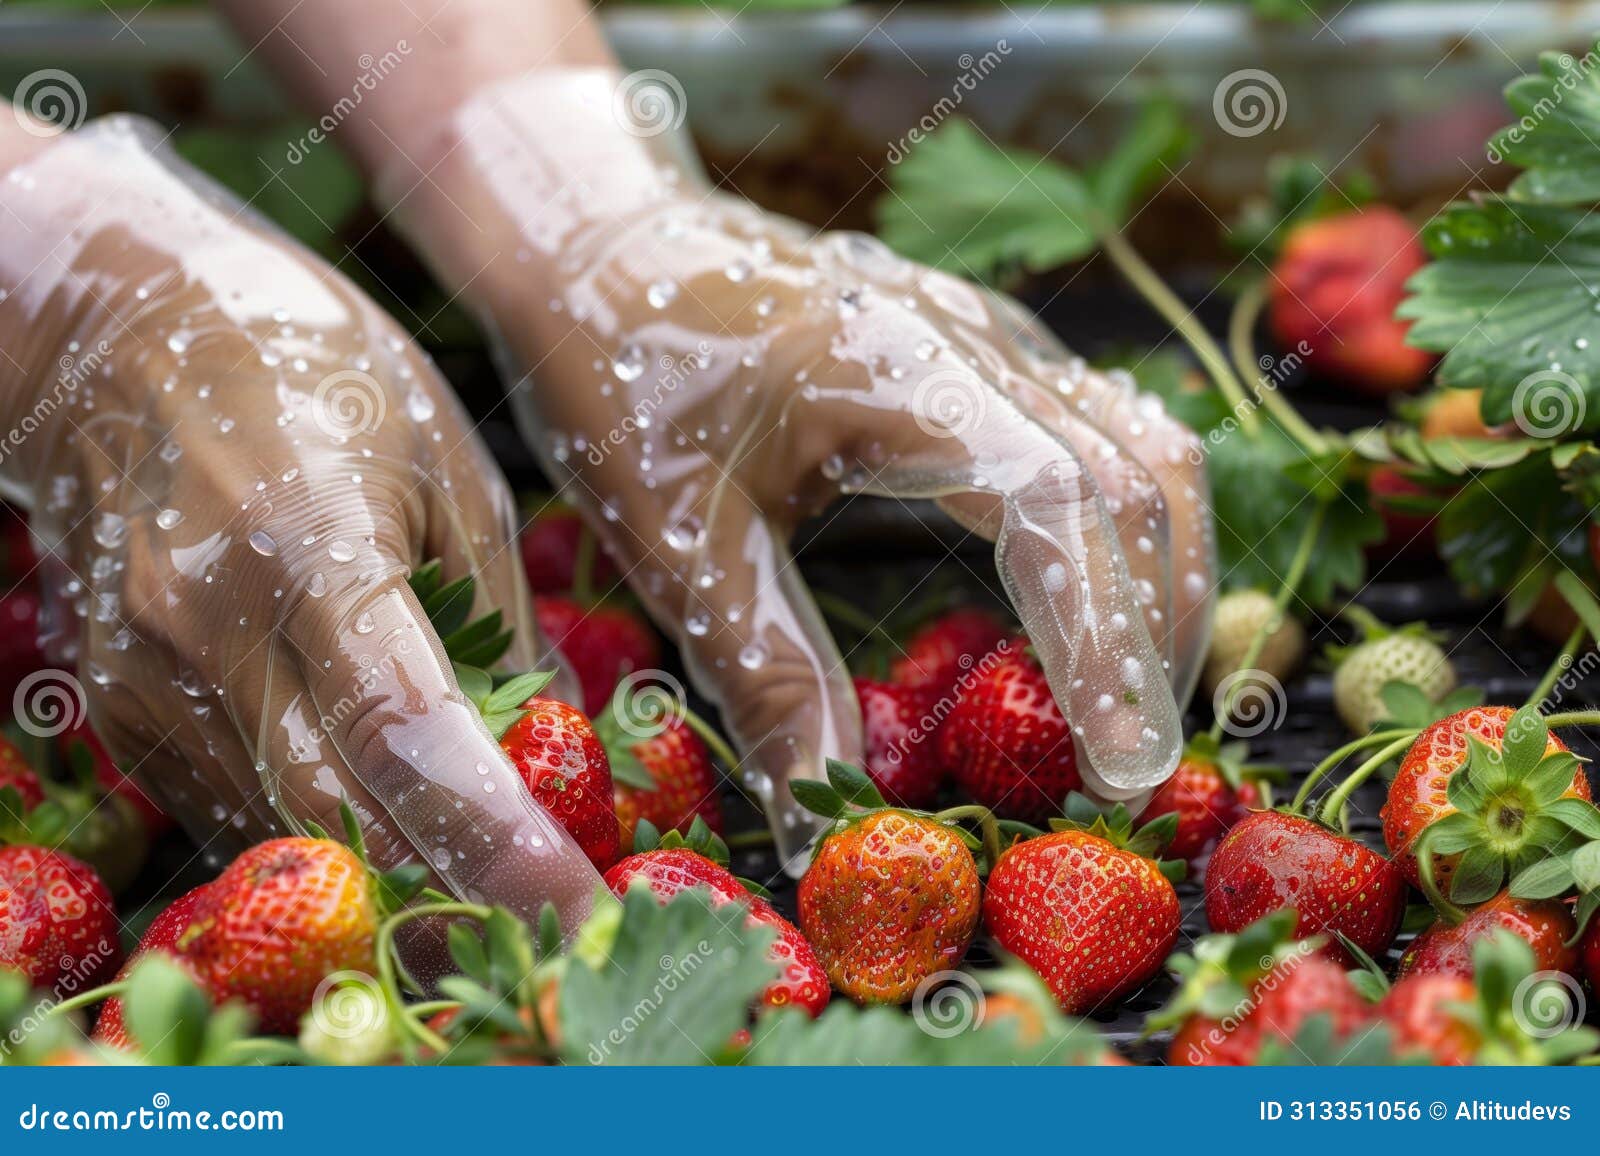 soggy strawberries being picked by hands clad in clear rain gloves